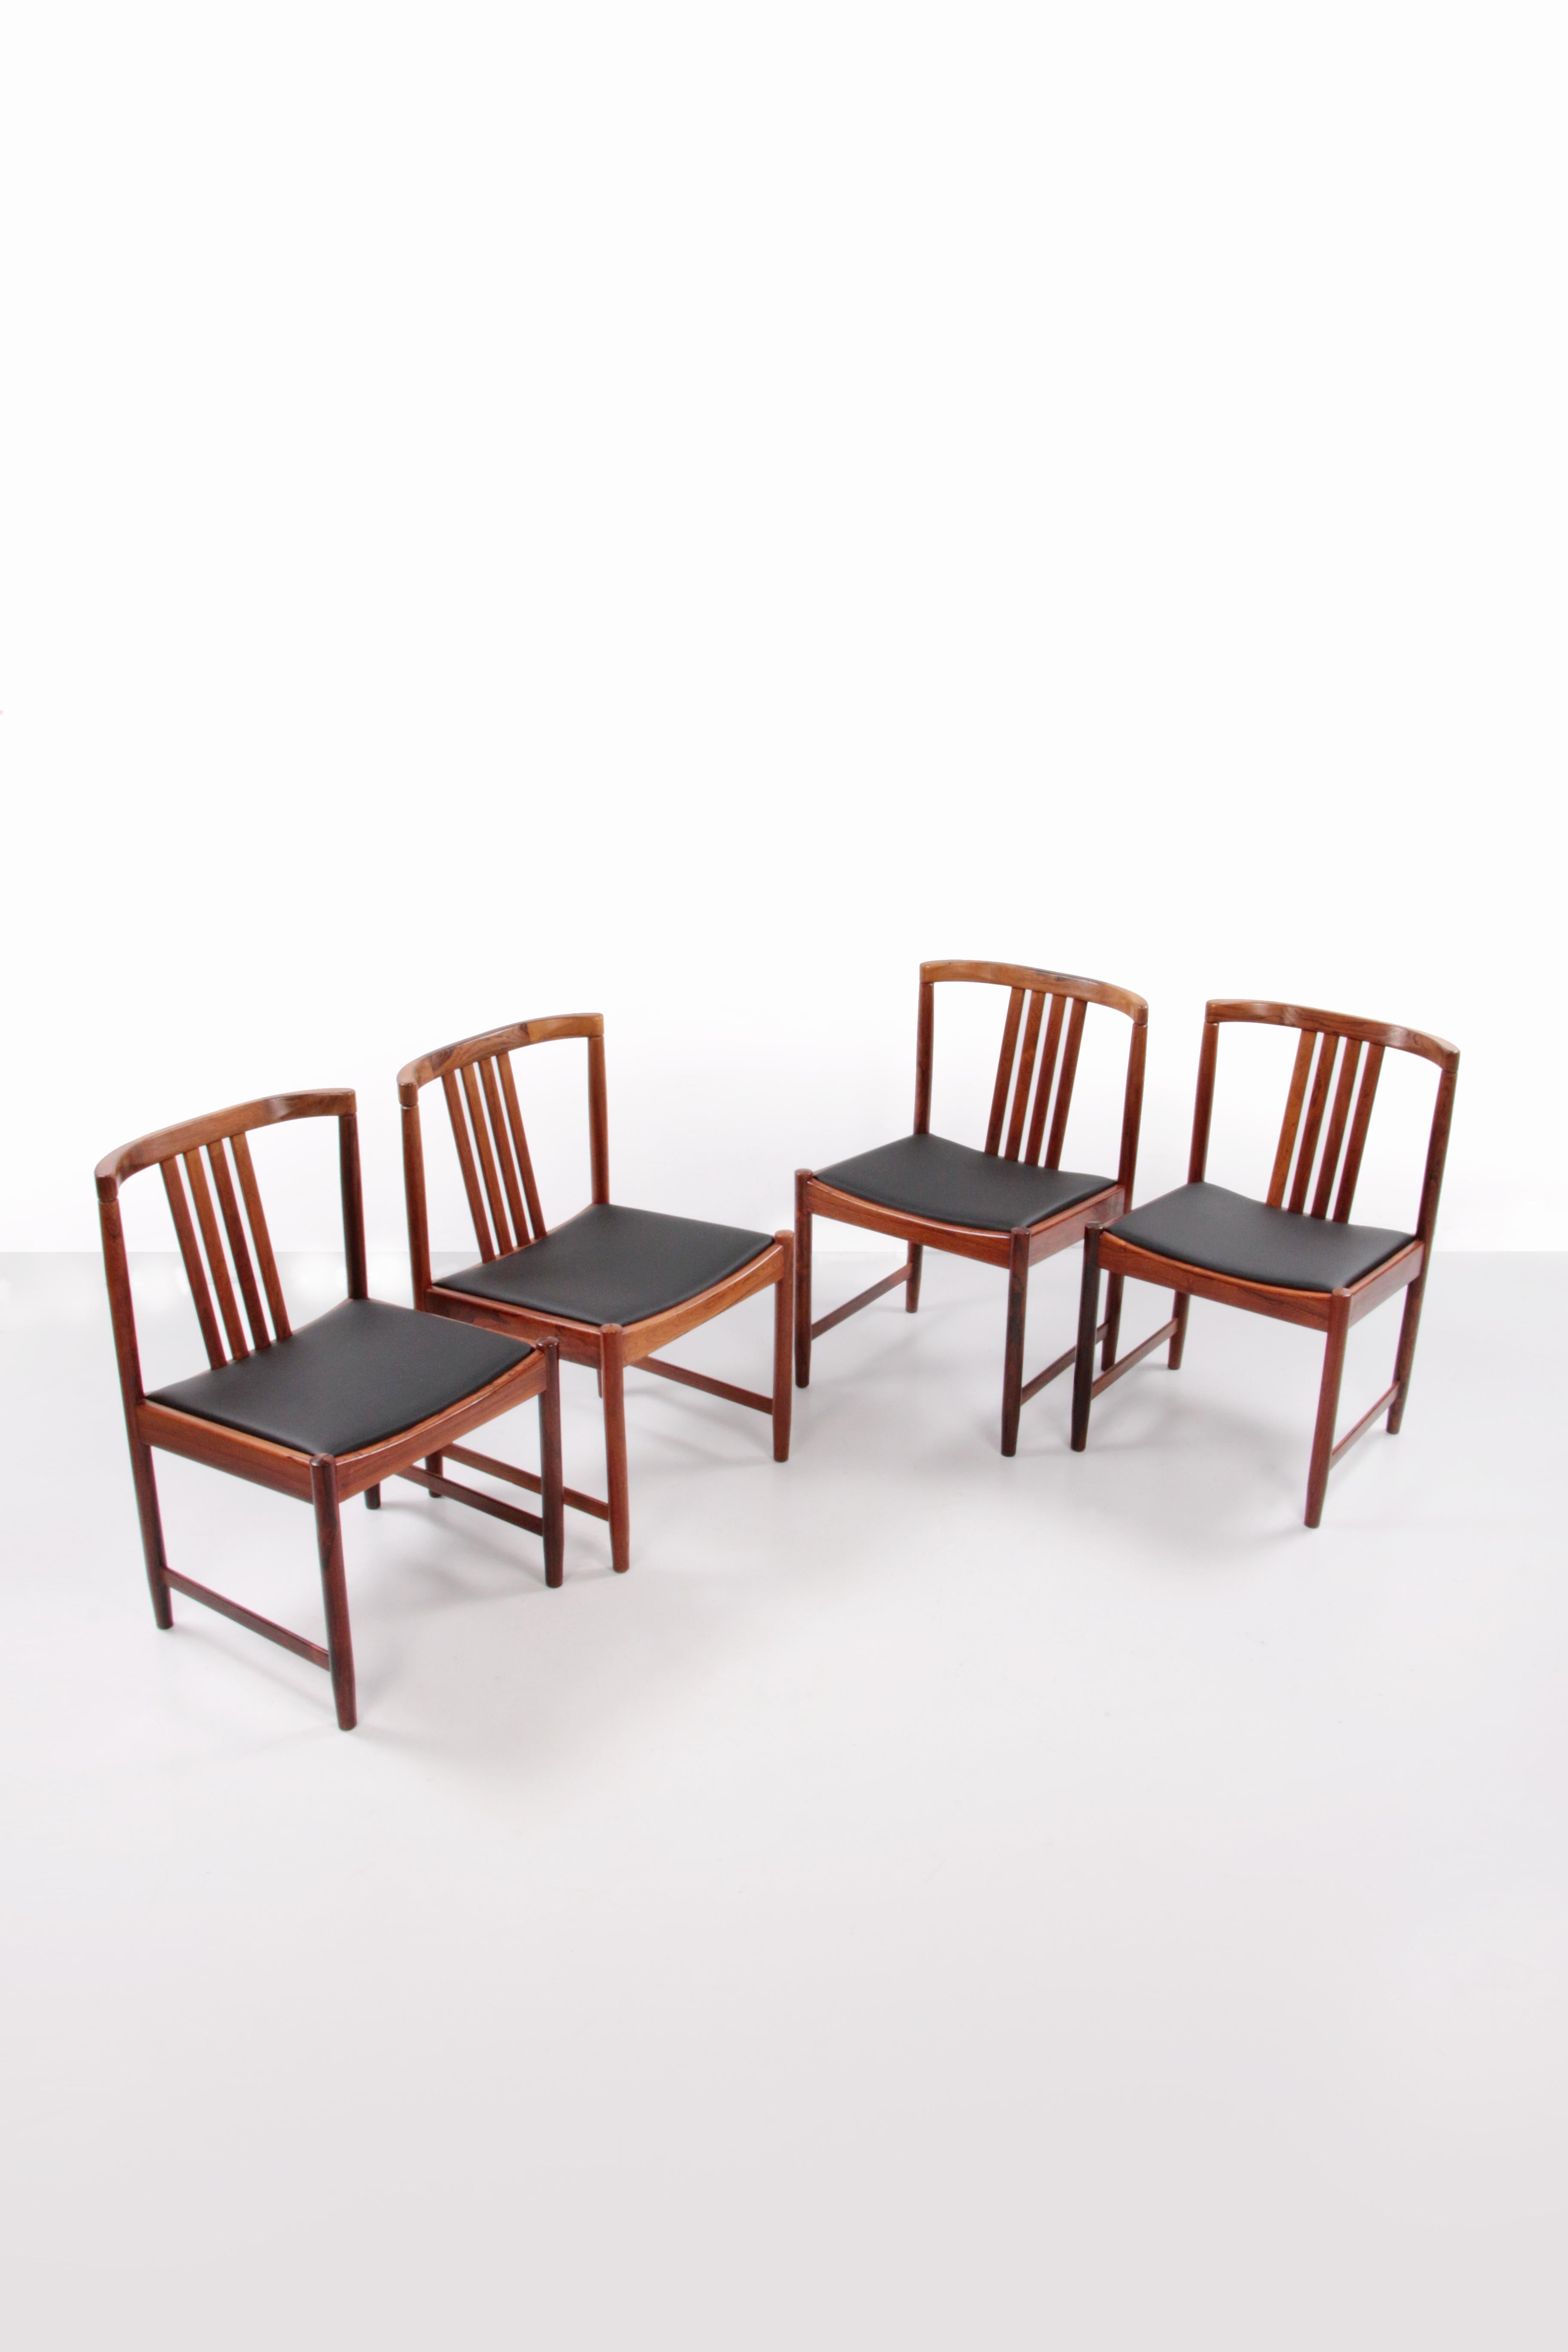 Dinner chairs design by Illum Wrapsø 1960 Denmark.


Beautiful set of four rare dark wood dining table chairs attributed to Illum Wikkelsø, Denmark 1960s. Modern Scandinavian chairs with an art deco look. The black vinyl seats are of a beautiful